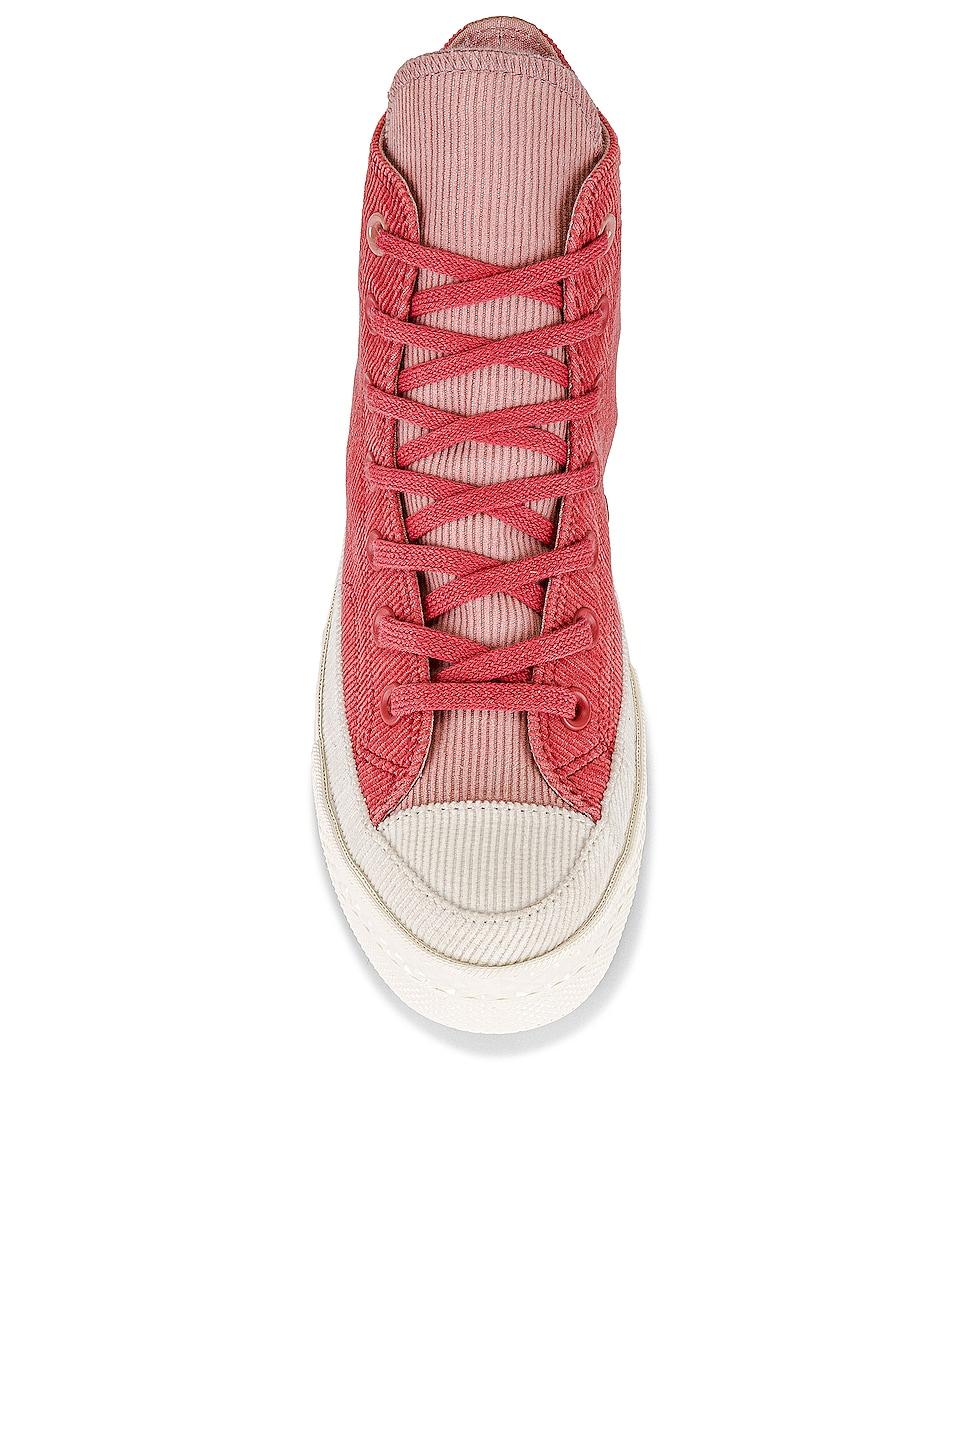 Converse Chuck 70 Workwear Textiles Sneaker in Pink | Lyst